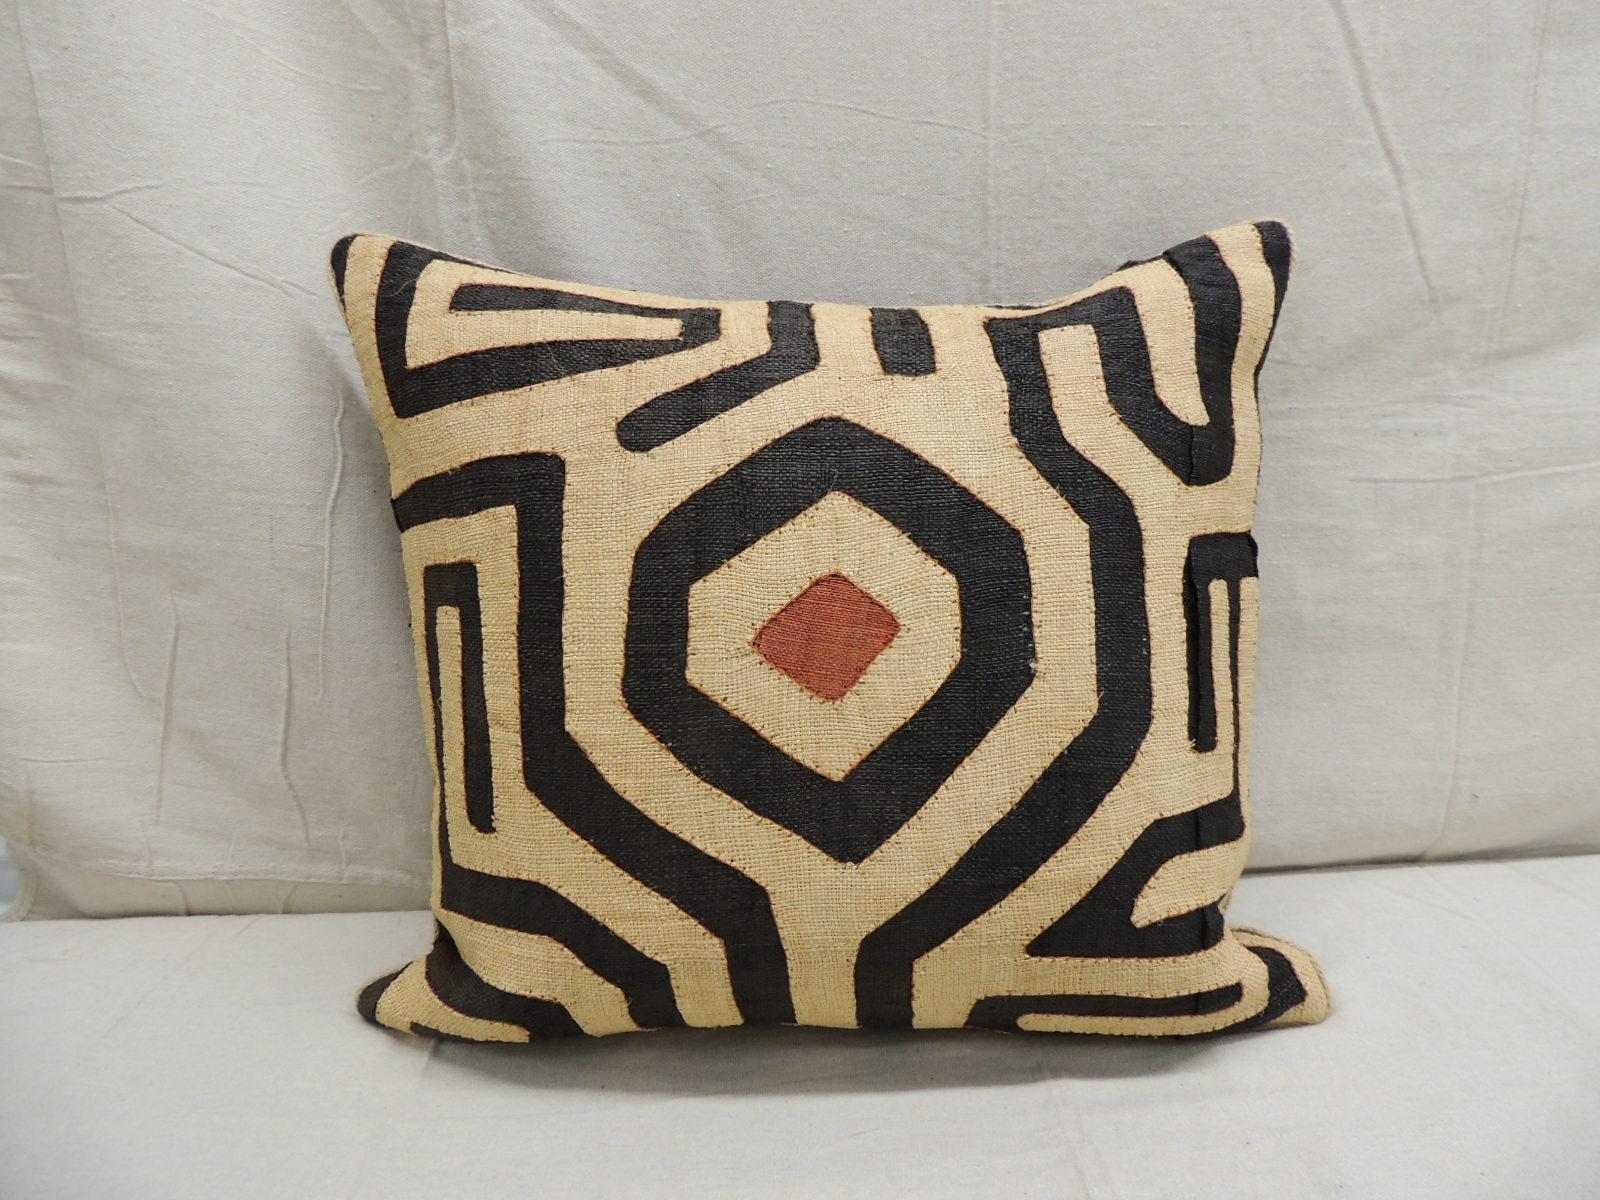 Vintage Kuba Tan and black handwoven patchwork square African Decorative Pillow
with antique orange linen backing and decorative jute trim all around.
Handwoven patchwork and appliqué raffia African decorative lumbar pillow with labyrinth